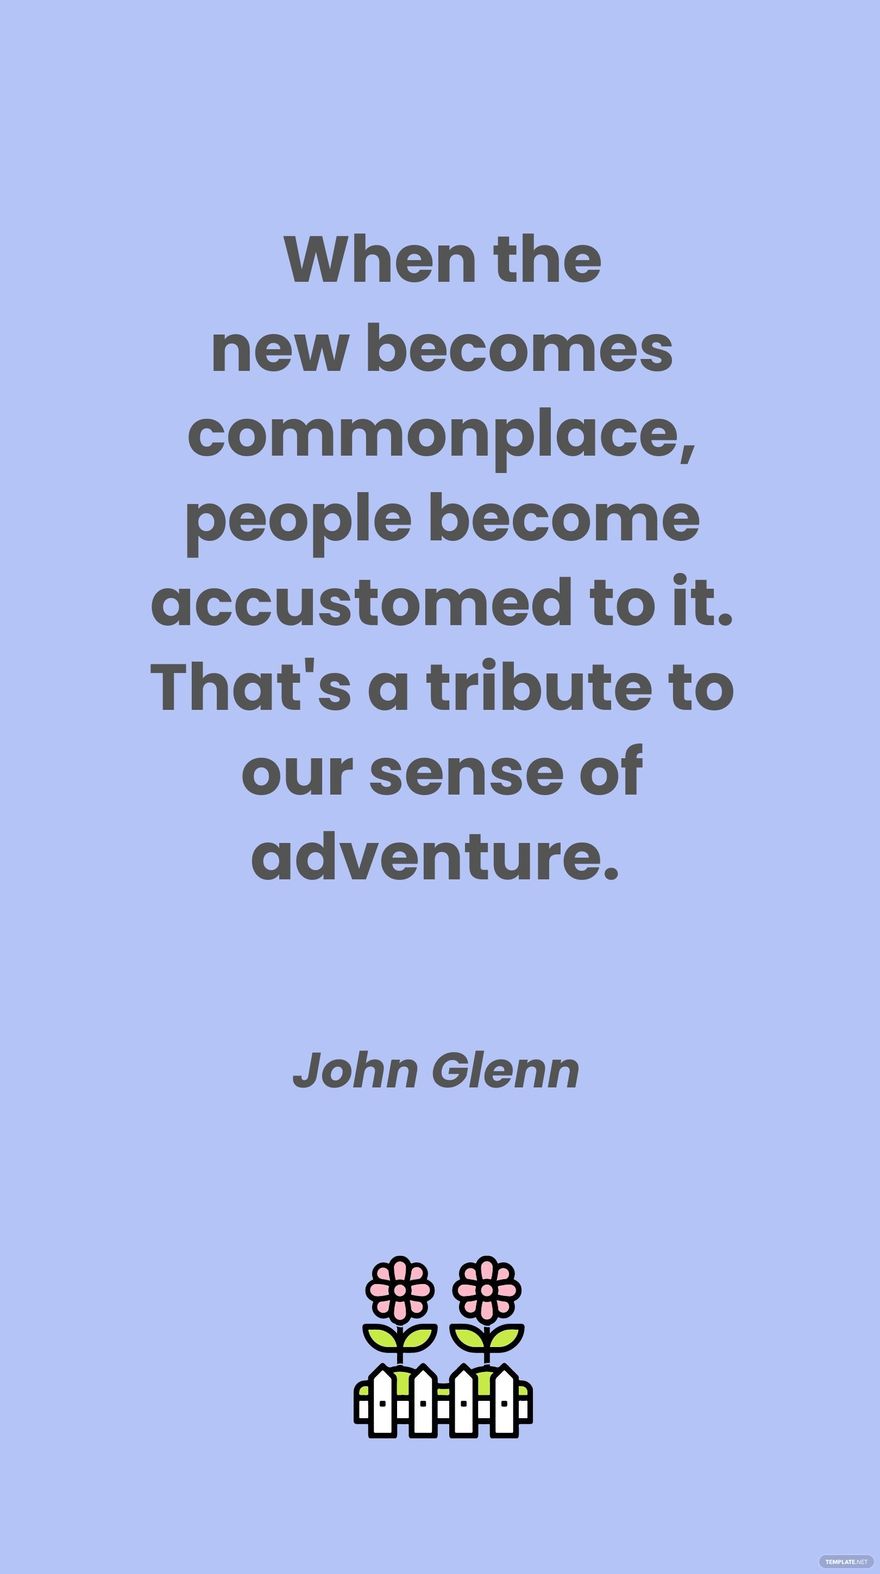 Free John Glenn - When the new becomes commonplace, people become accustomed to it. That's a tribute to our sense of adventure. in JPG